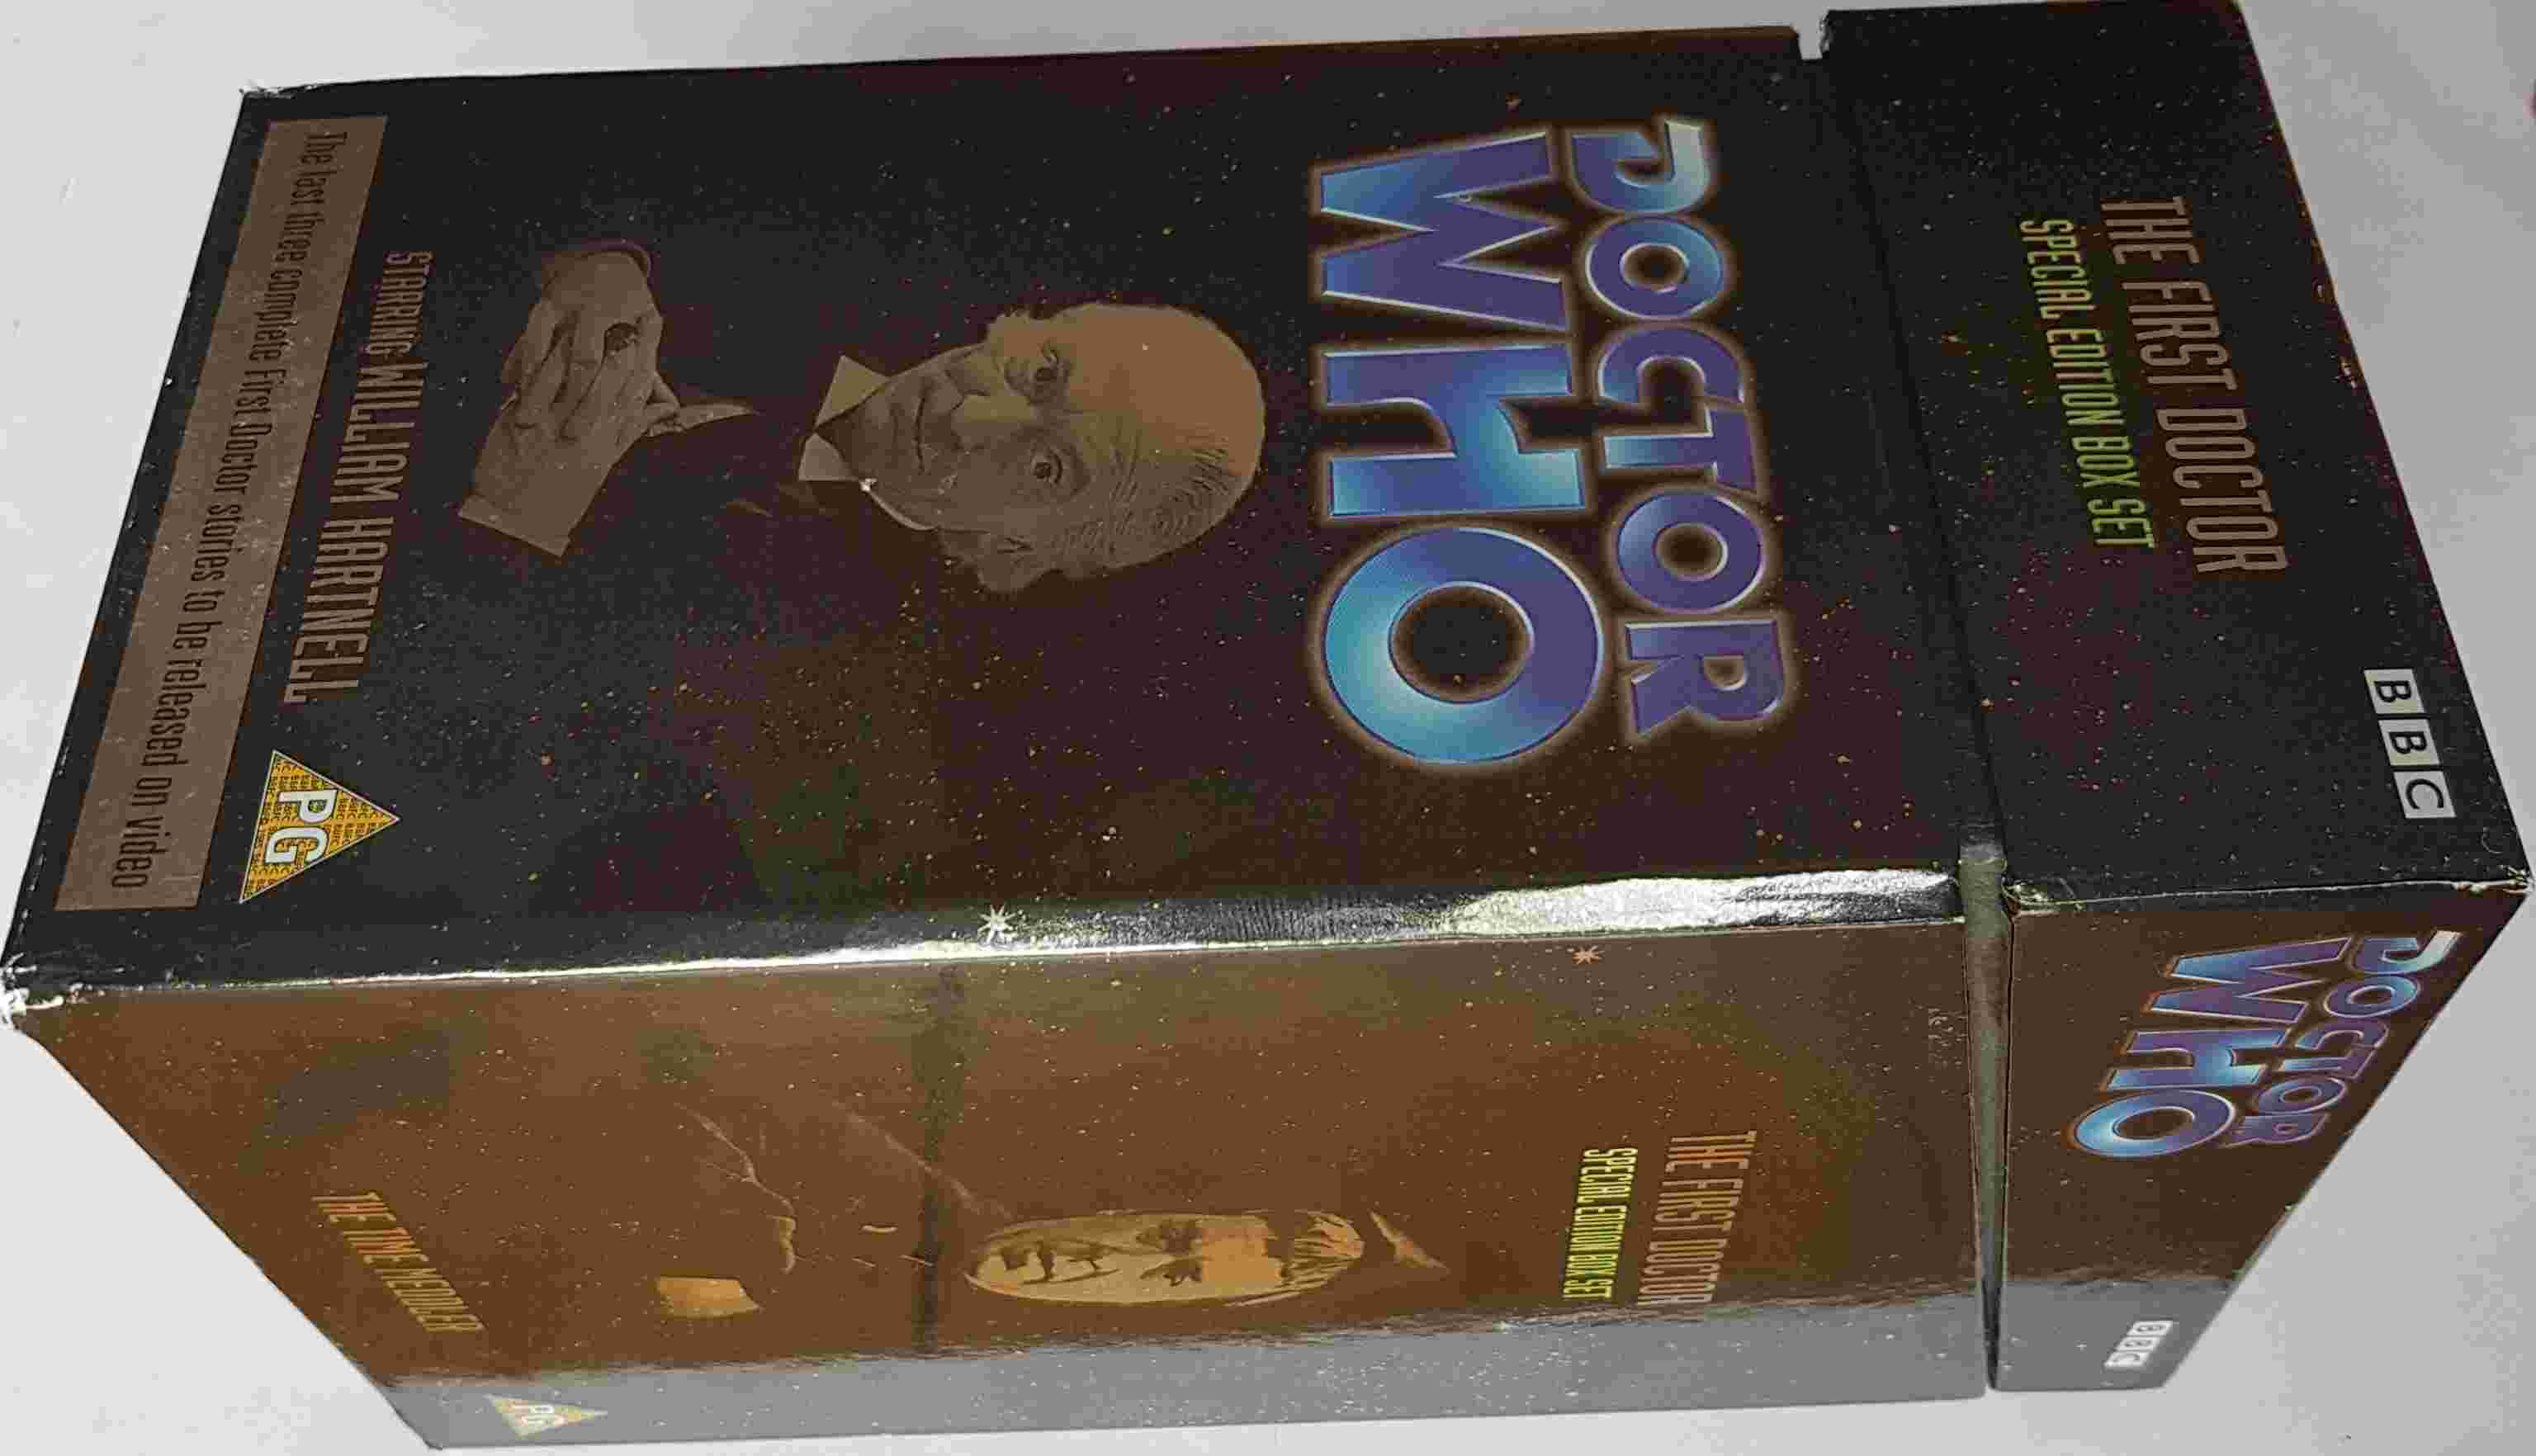 Picture of BBCV 7268 Doctor Who - The first doctor - Special edition boxed set by artist Peter R. Newman / Dennis Spooner / Donald Cotton from the BBC videos - Records and Tapes library